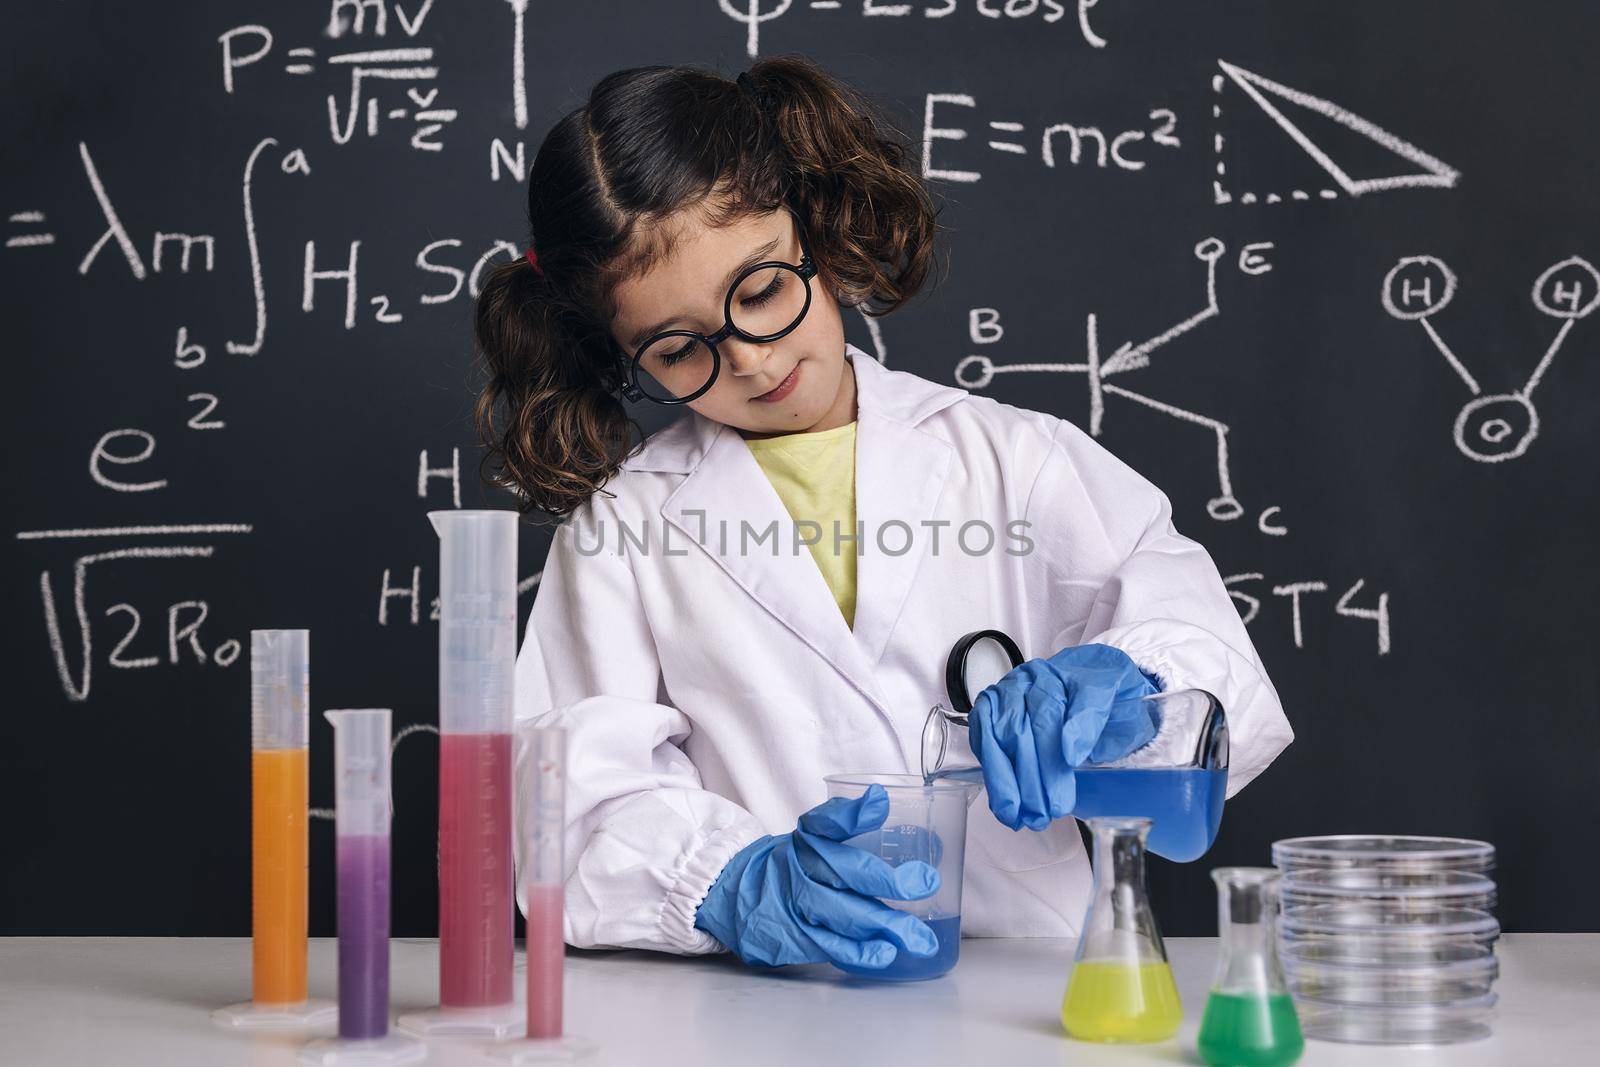 child scientist with glasses and gloves in lab coat mixing chemical liquids in flasks, on blackboard background with science formulas, concept of back to school and successful female career